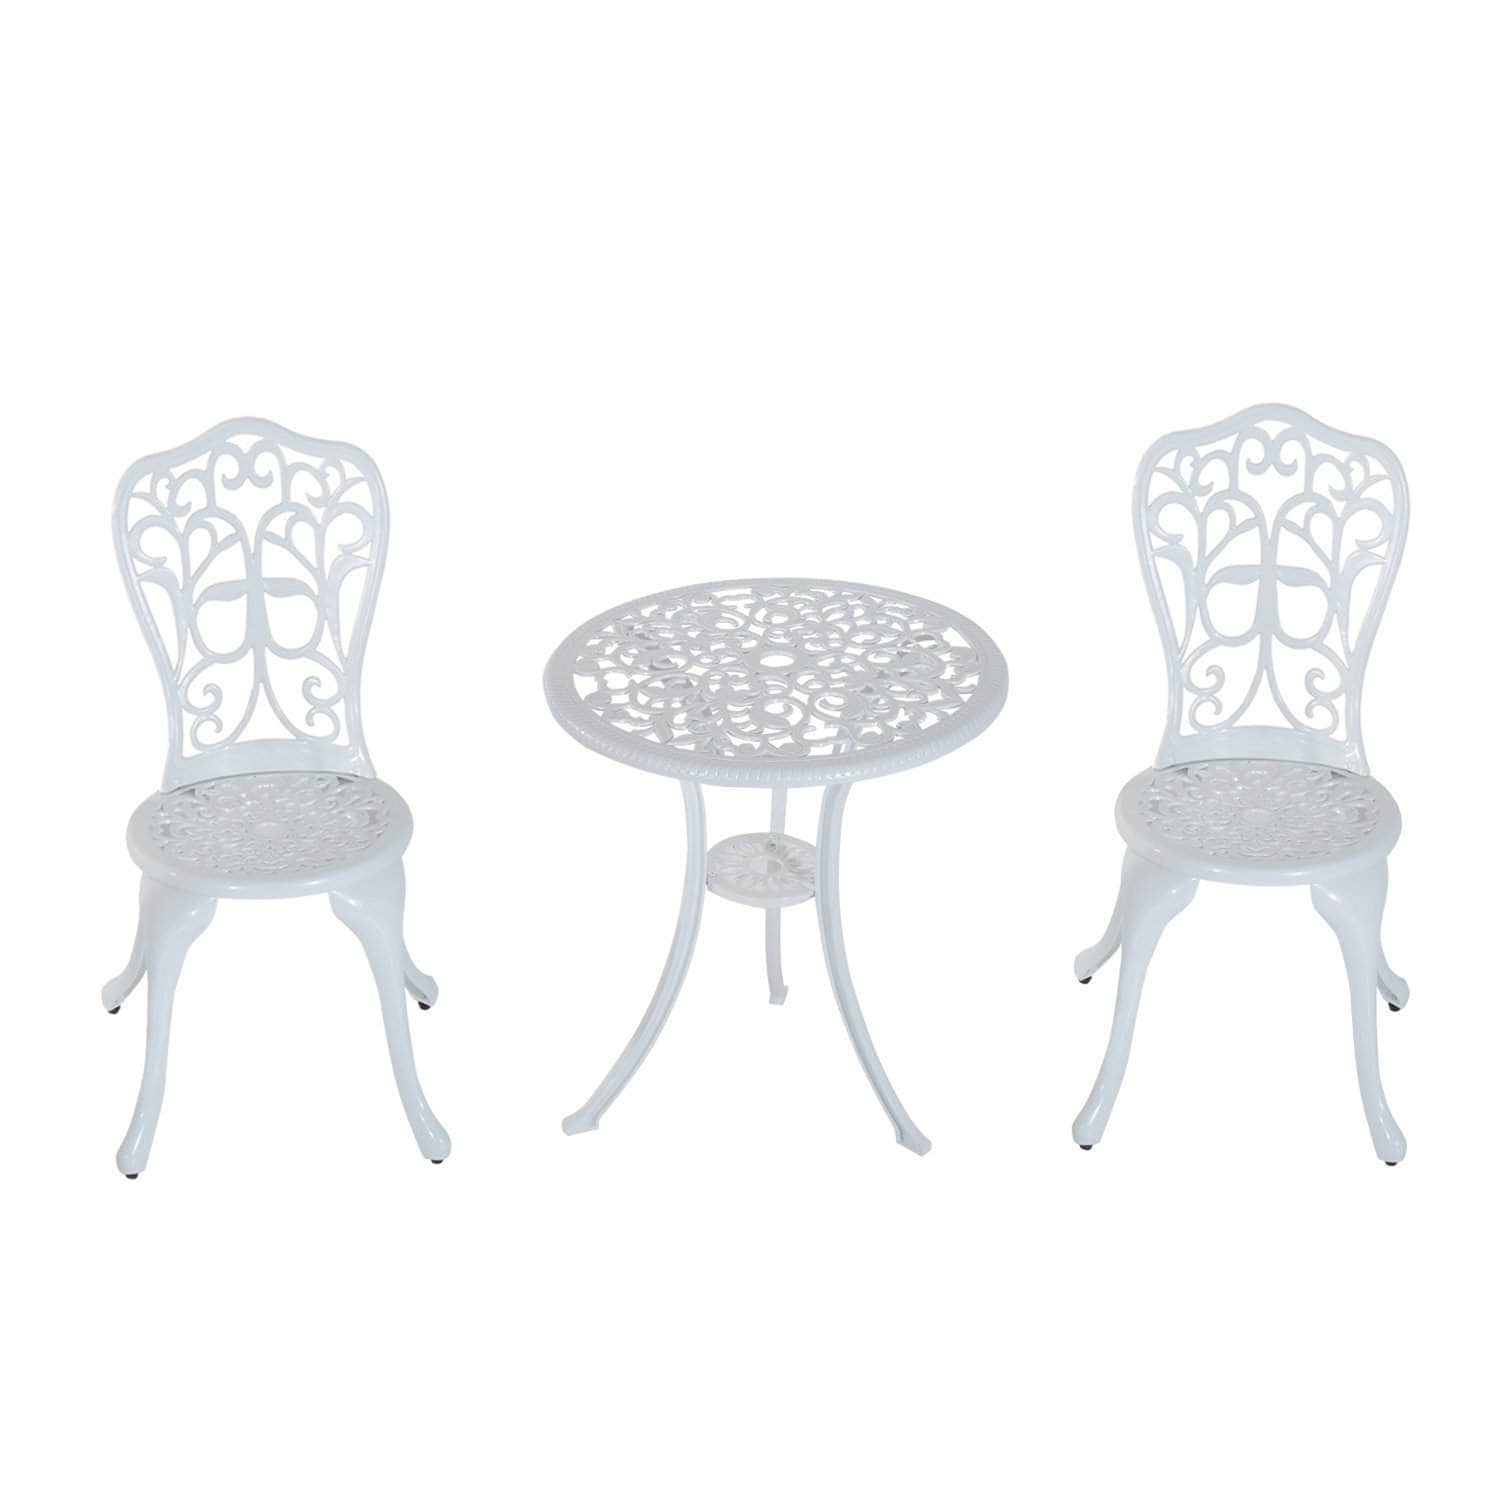 Aosom Dining Set White 3 Piece Outdoor Patio Garden Cast Aluminum Cafe Bistro Round Table and Chair Set - Available in 3 Colours